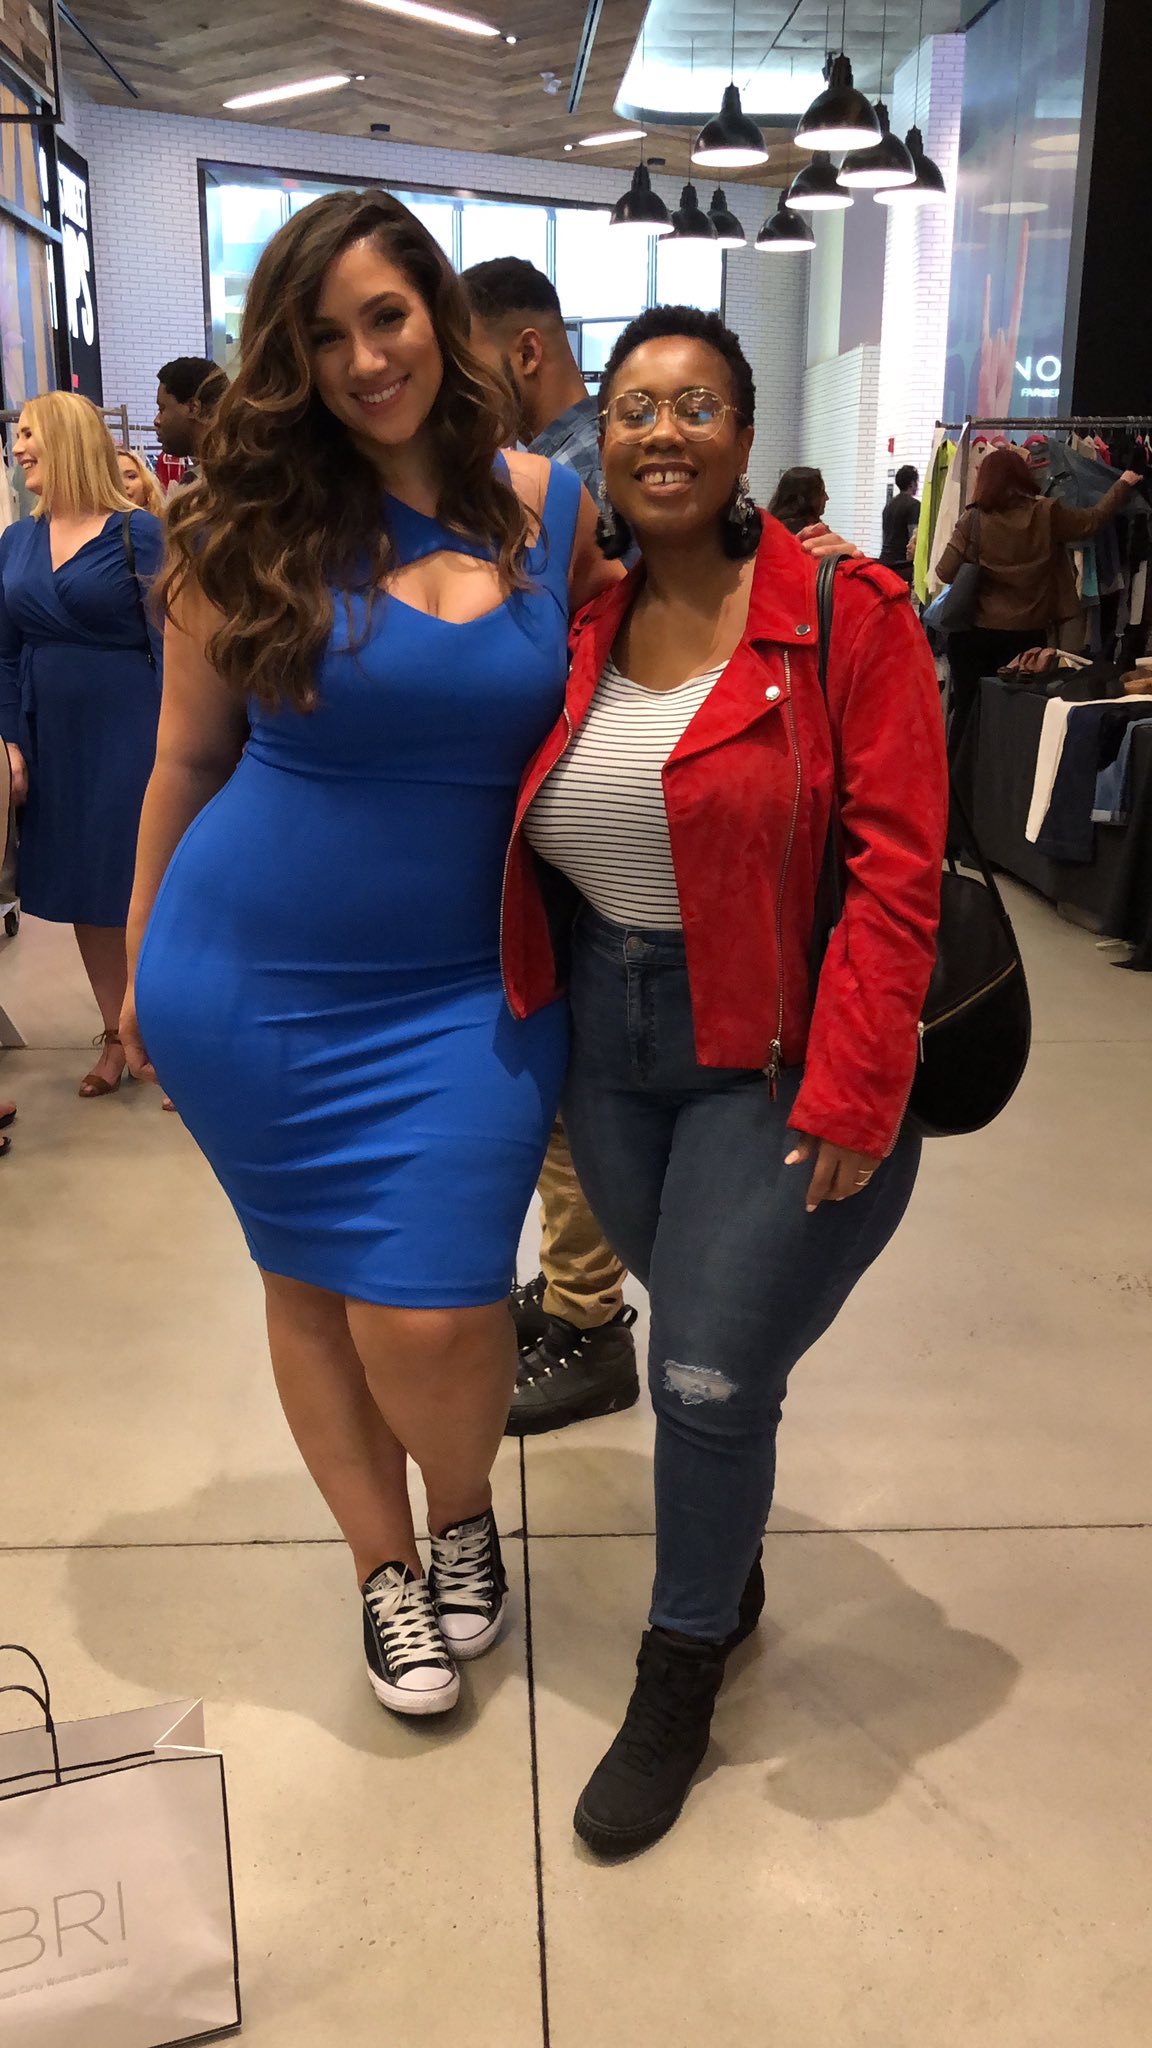 Erica Lauren on X: So much fun today at #PSBKLYN ! Met a ton of